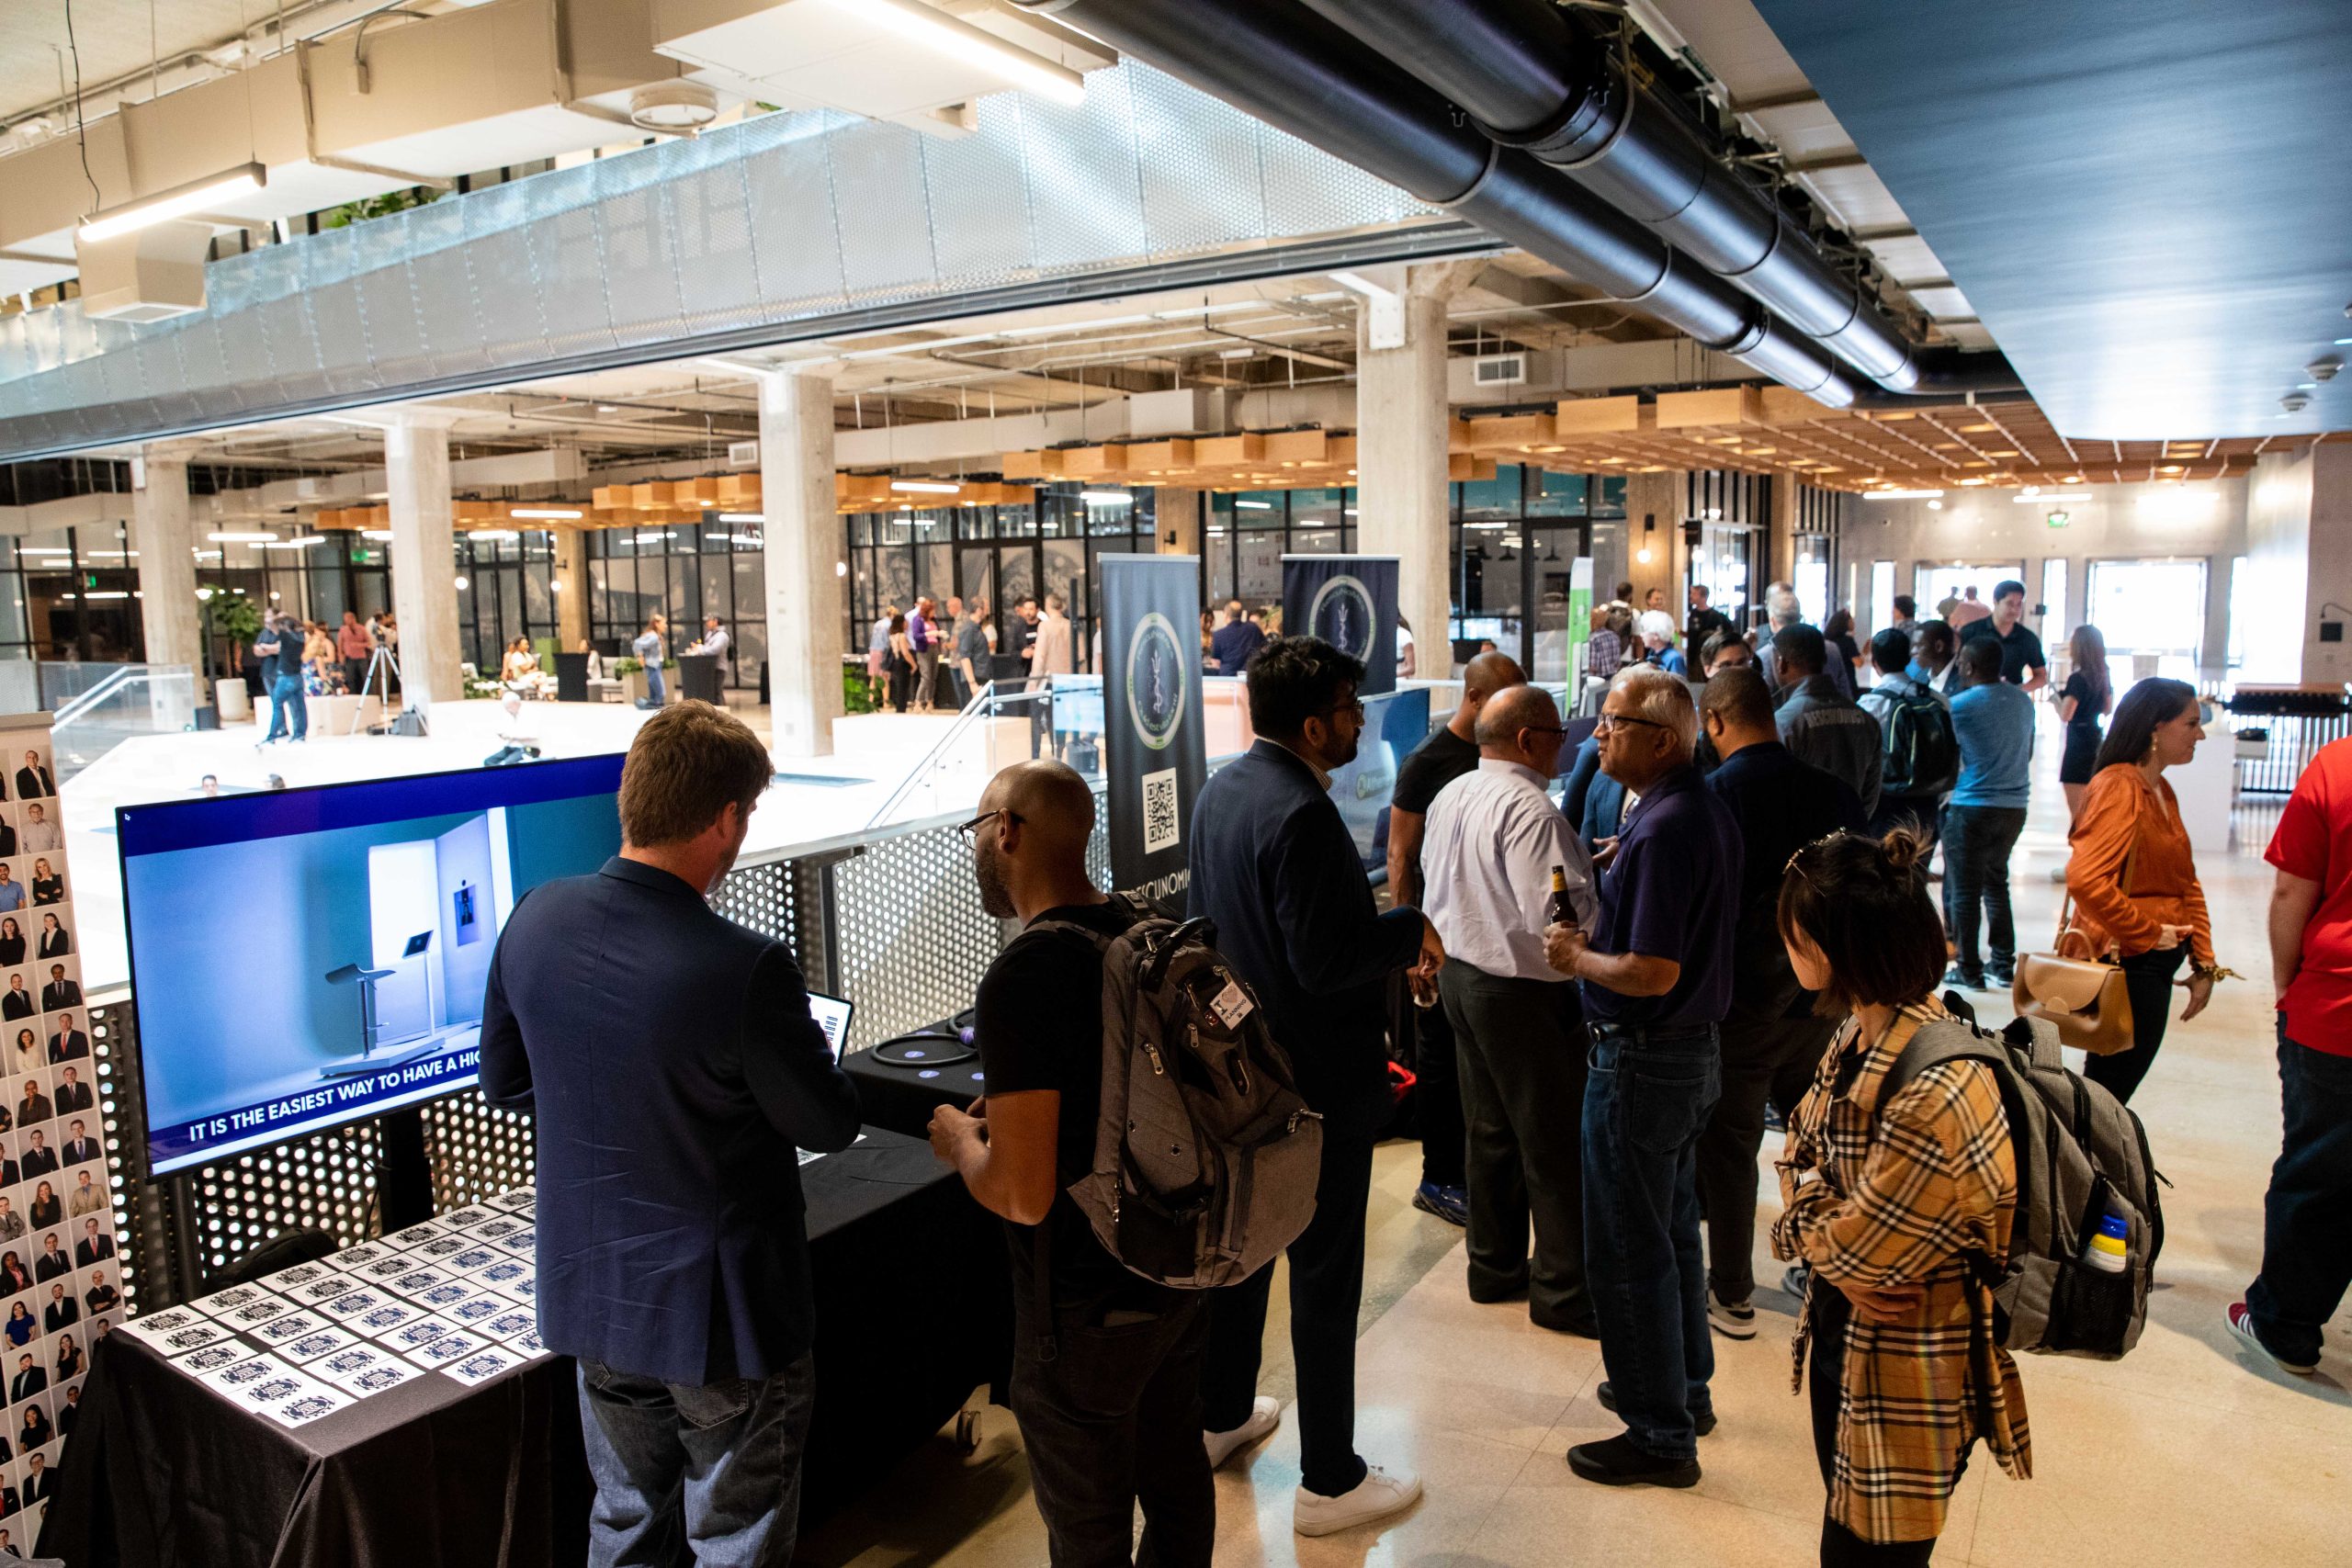 The Ion Celebrates their Cohorts’ Success with a Demo Day